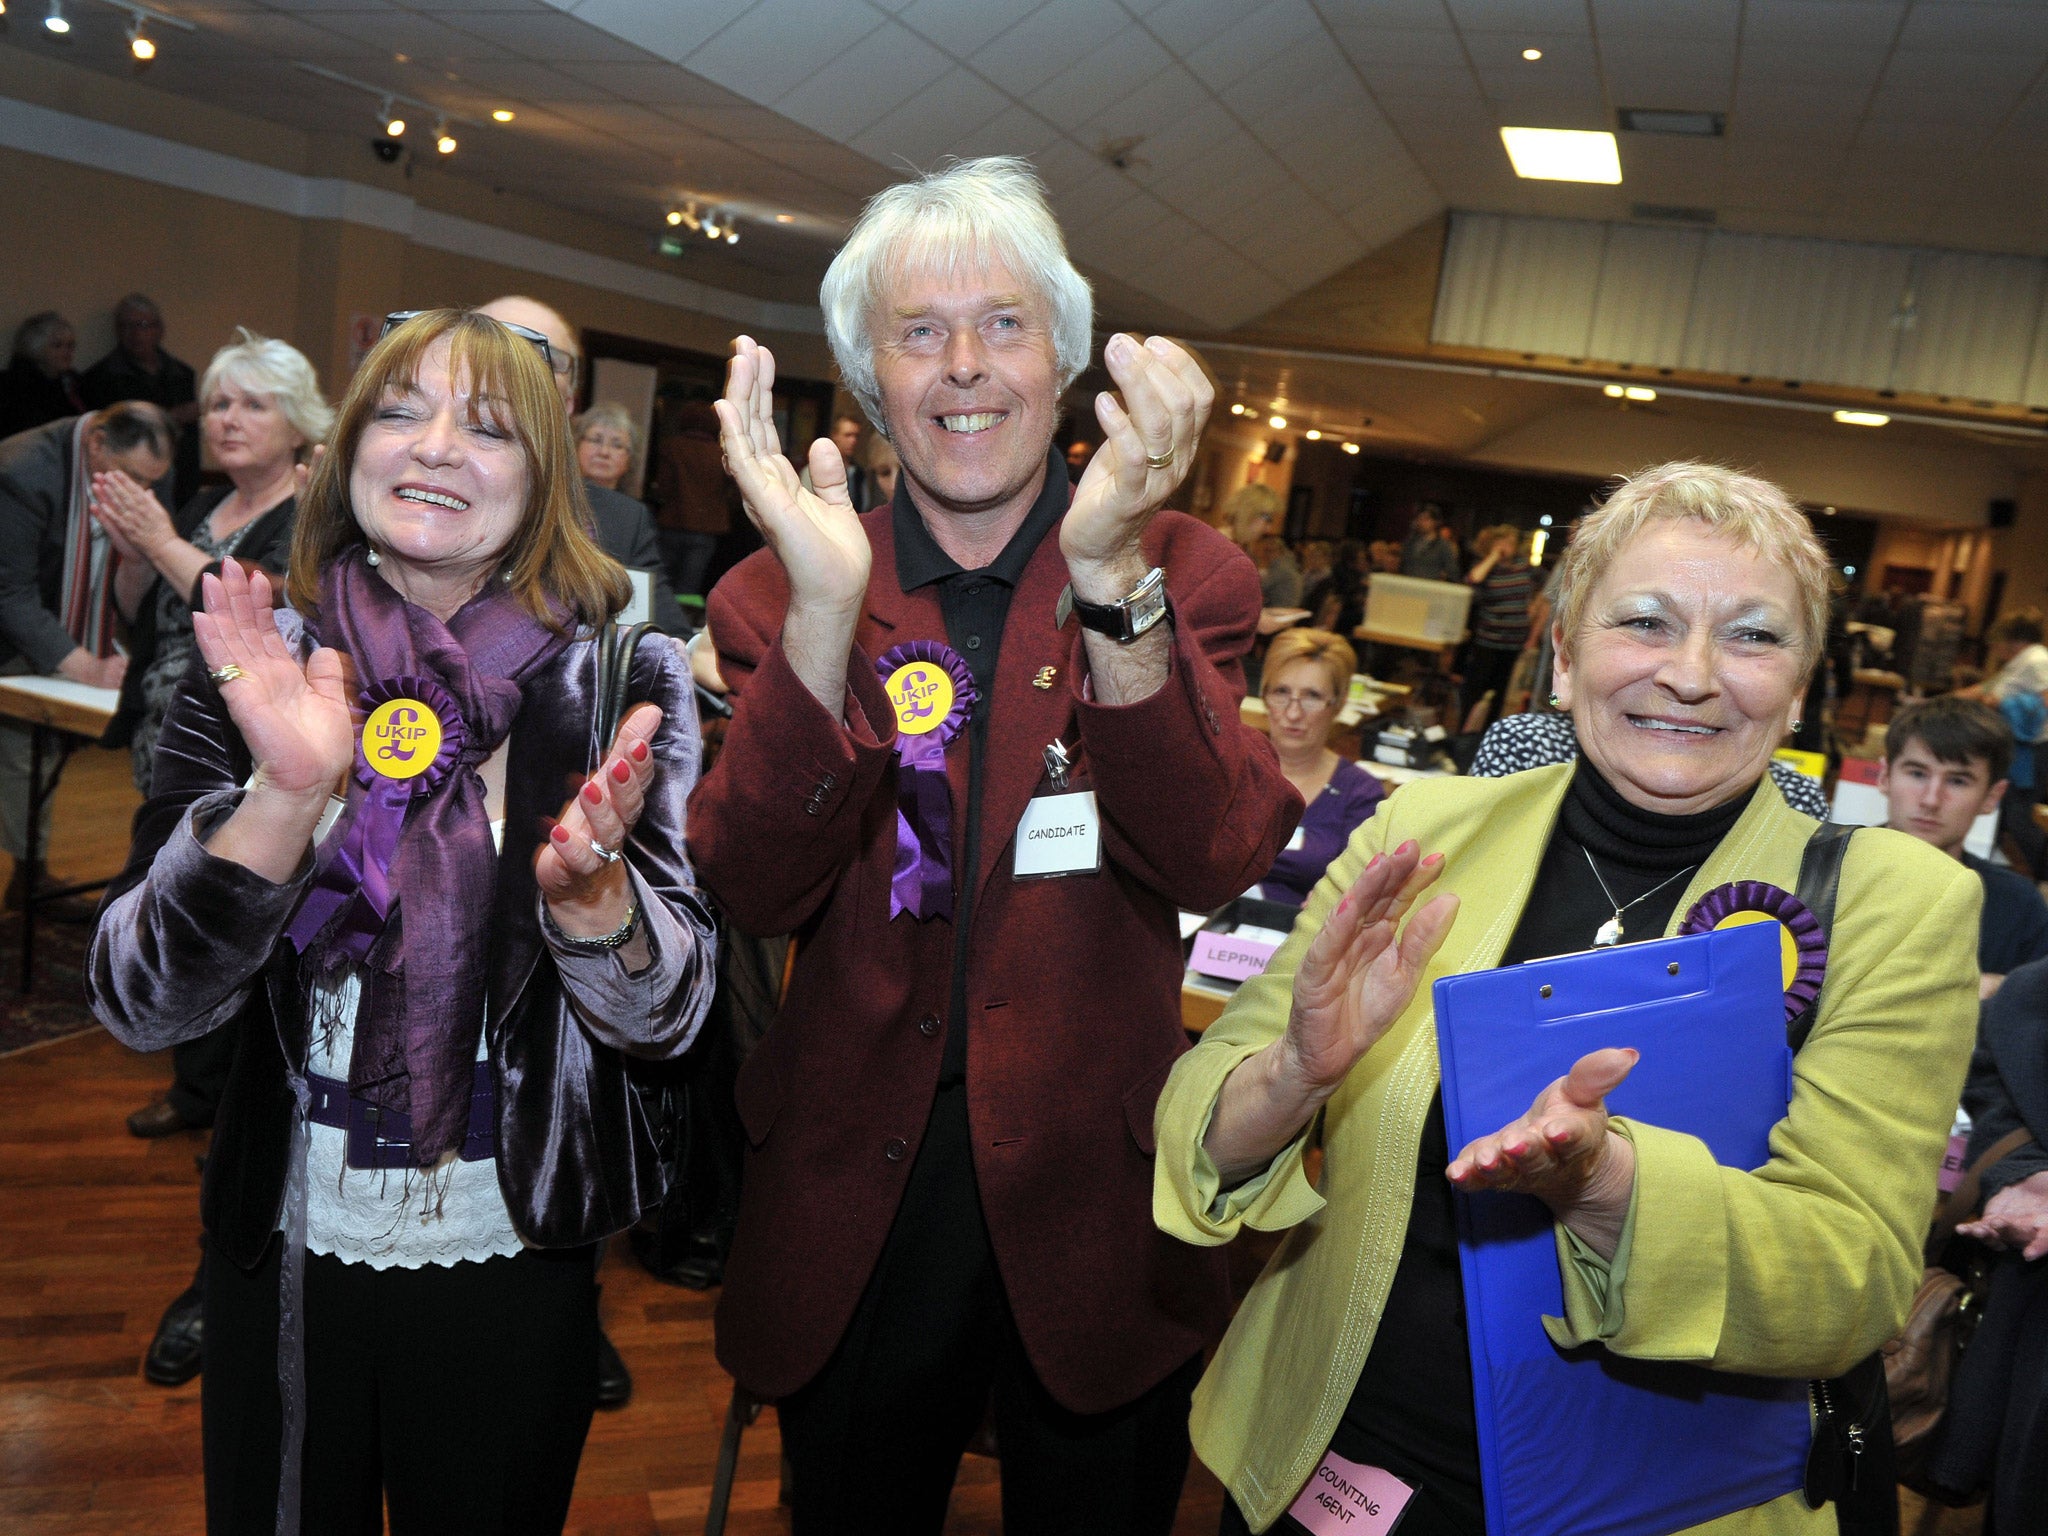 UKIP supporters celebrate as UKIP's Colin Guyton wins the Drybrook and Lydbrook seat, at the count in Oaklands Snooker Club in Cinderford, Gloucestershire